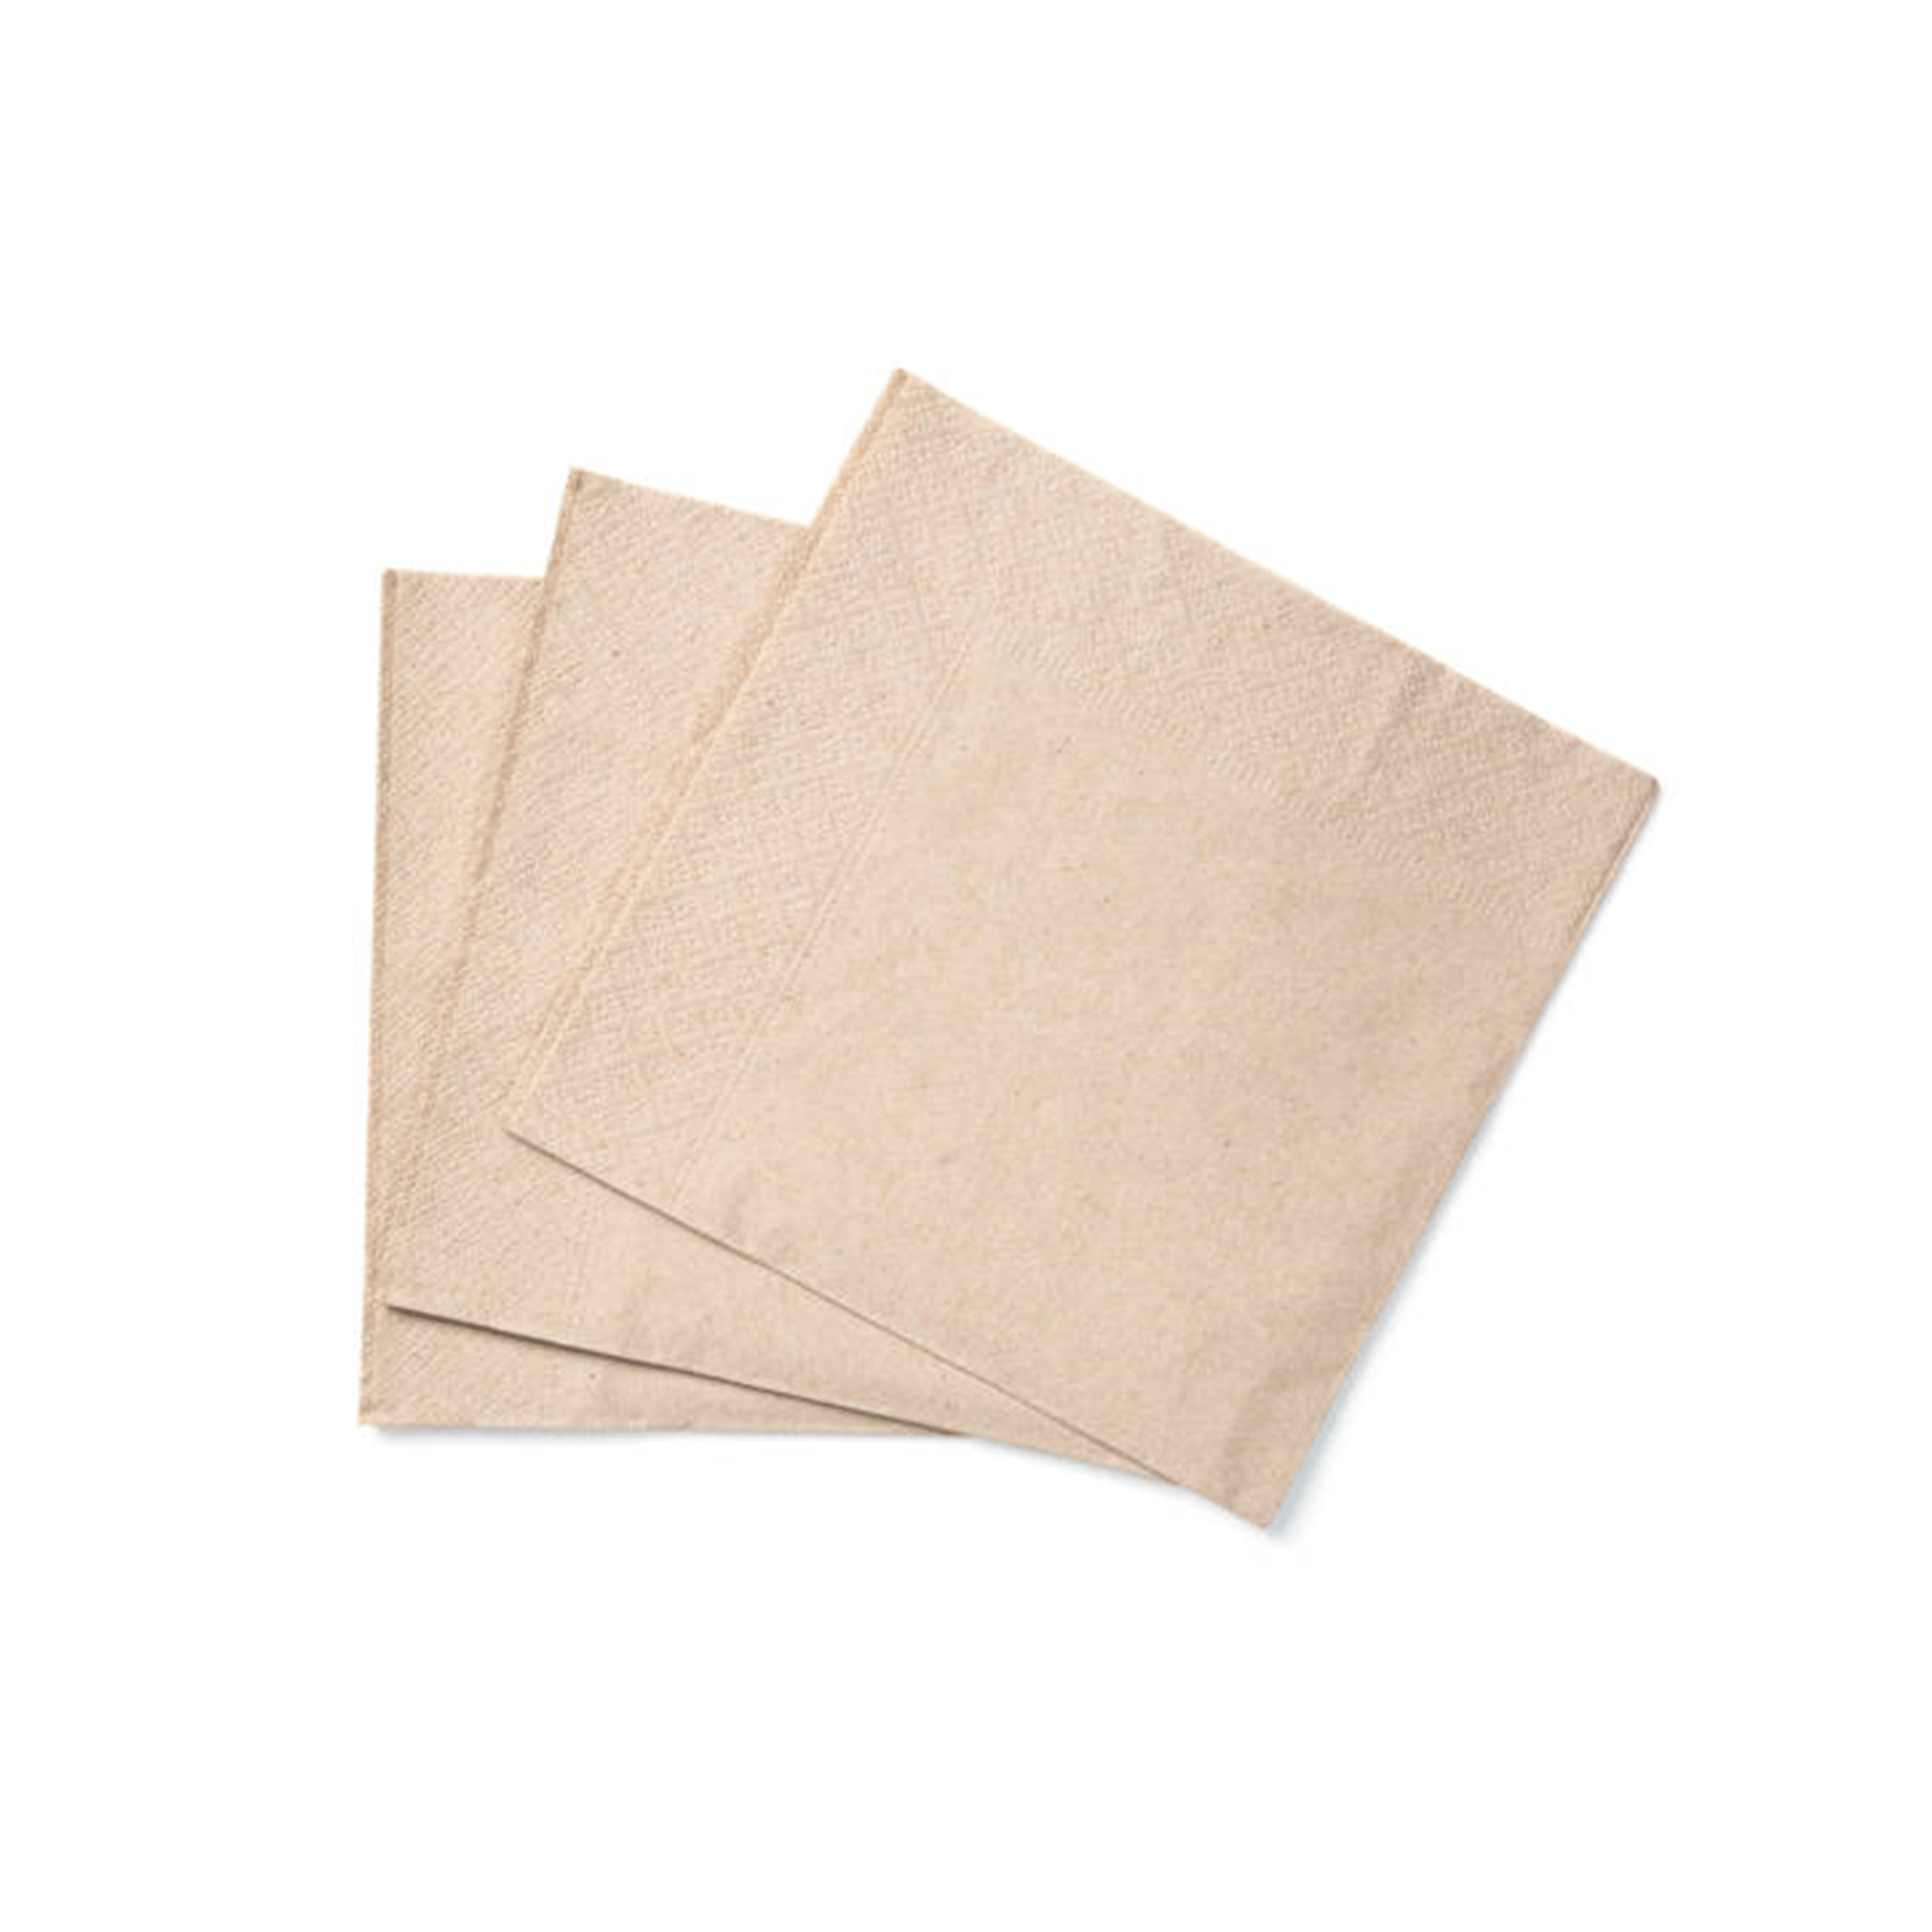 Eco-Friendly 3-Ply Recycled Paper Serviettes - Set of 20. Soft and useful sustainable serviettes disposable thick tan eco-friendly serviettes are made from recycled paper. It is 100% compostable within 45 days and it comes in a set of 20, which is ideal for dinner parties, picnic and camping trips. Size: 33 x 33cm. Bags Direct wholesale online shop 602500150